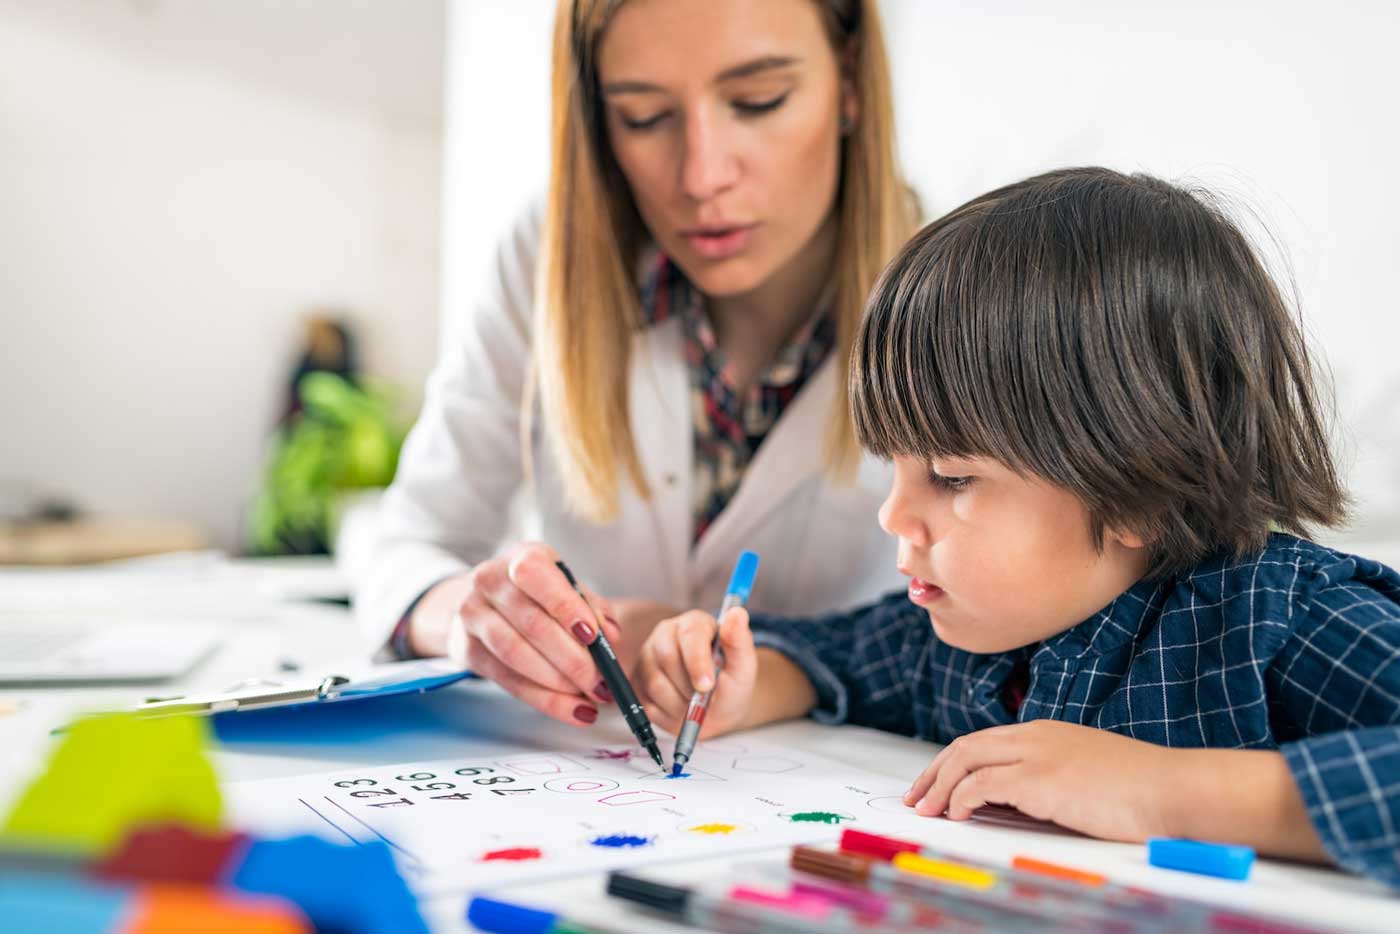 Photograph of child and therapist drawing together